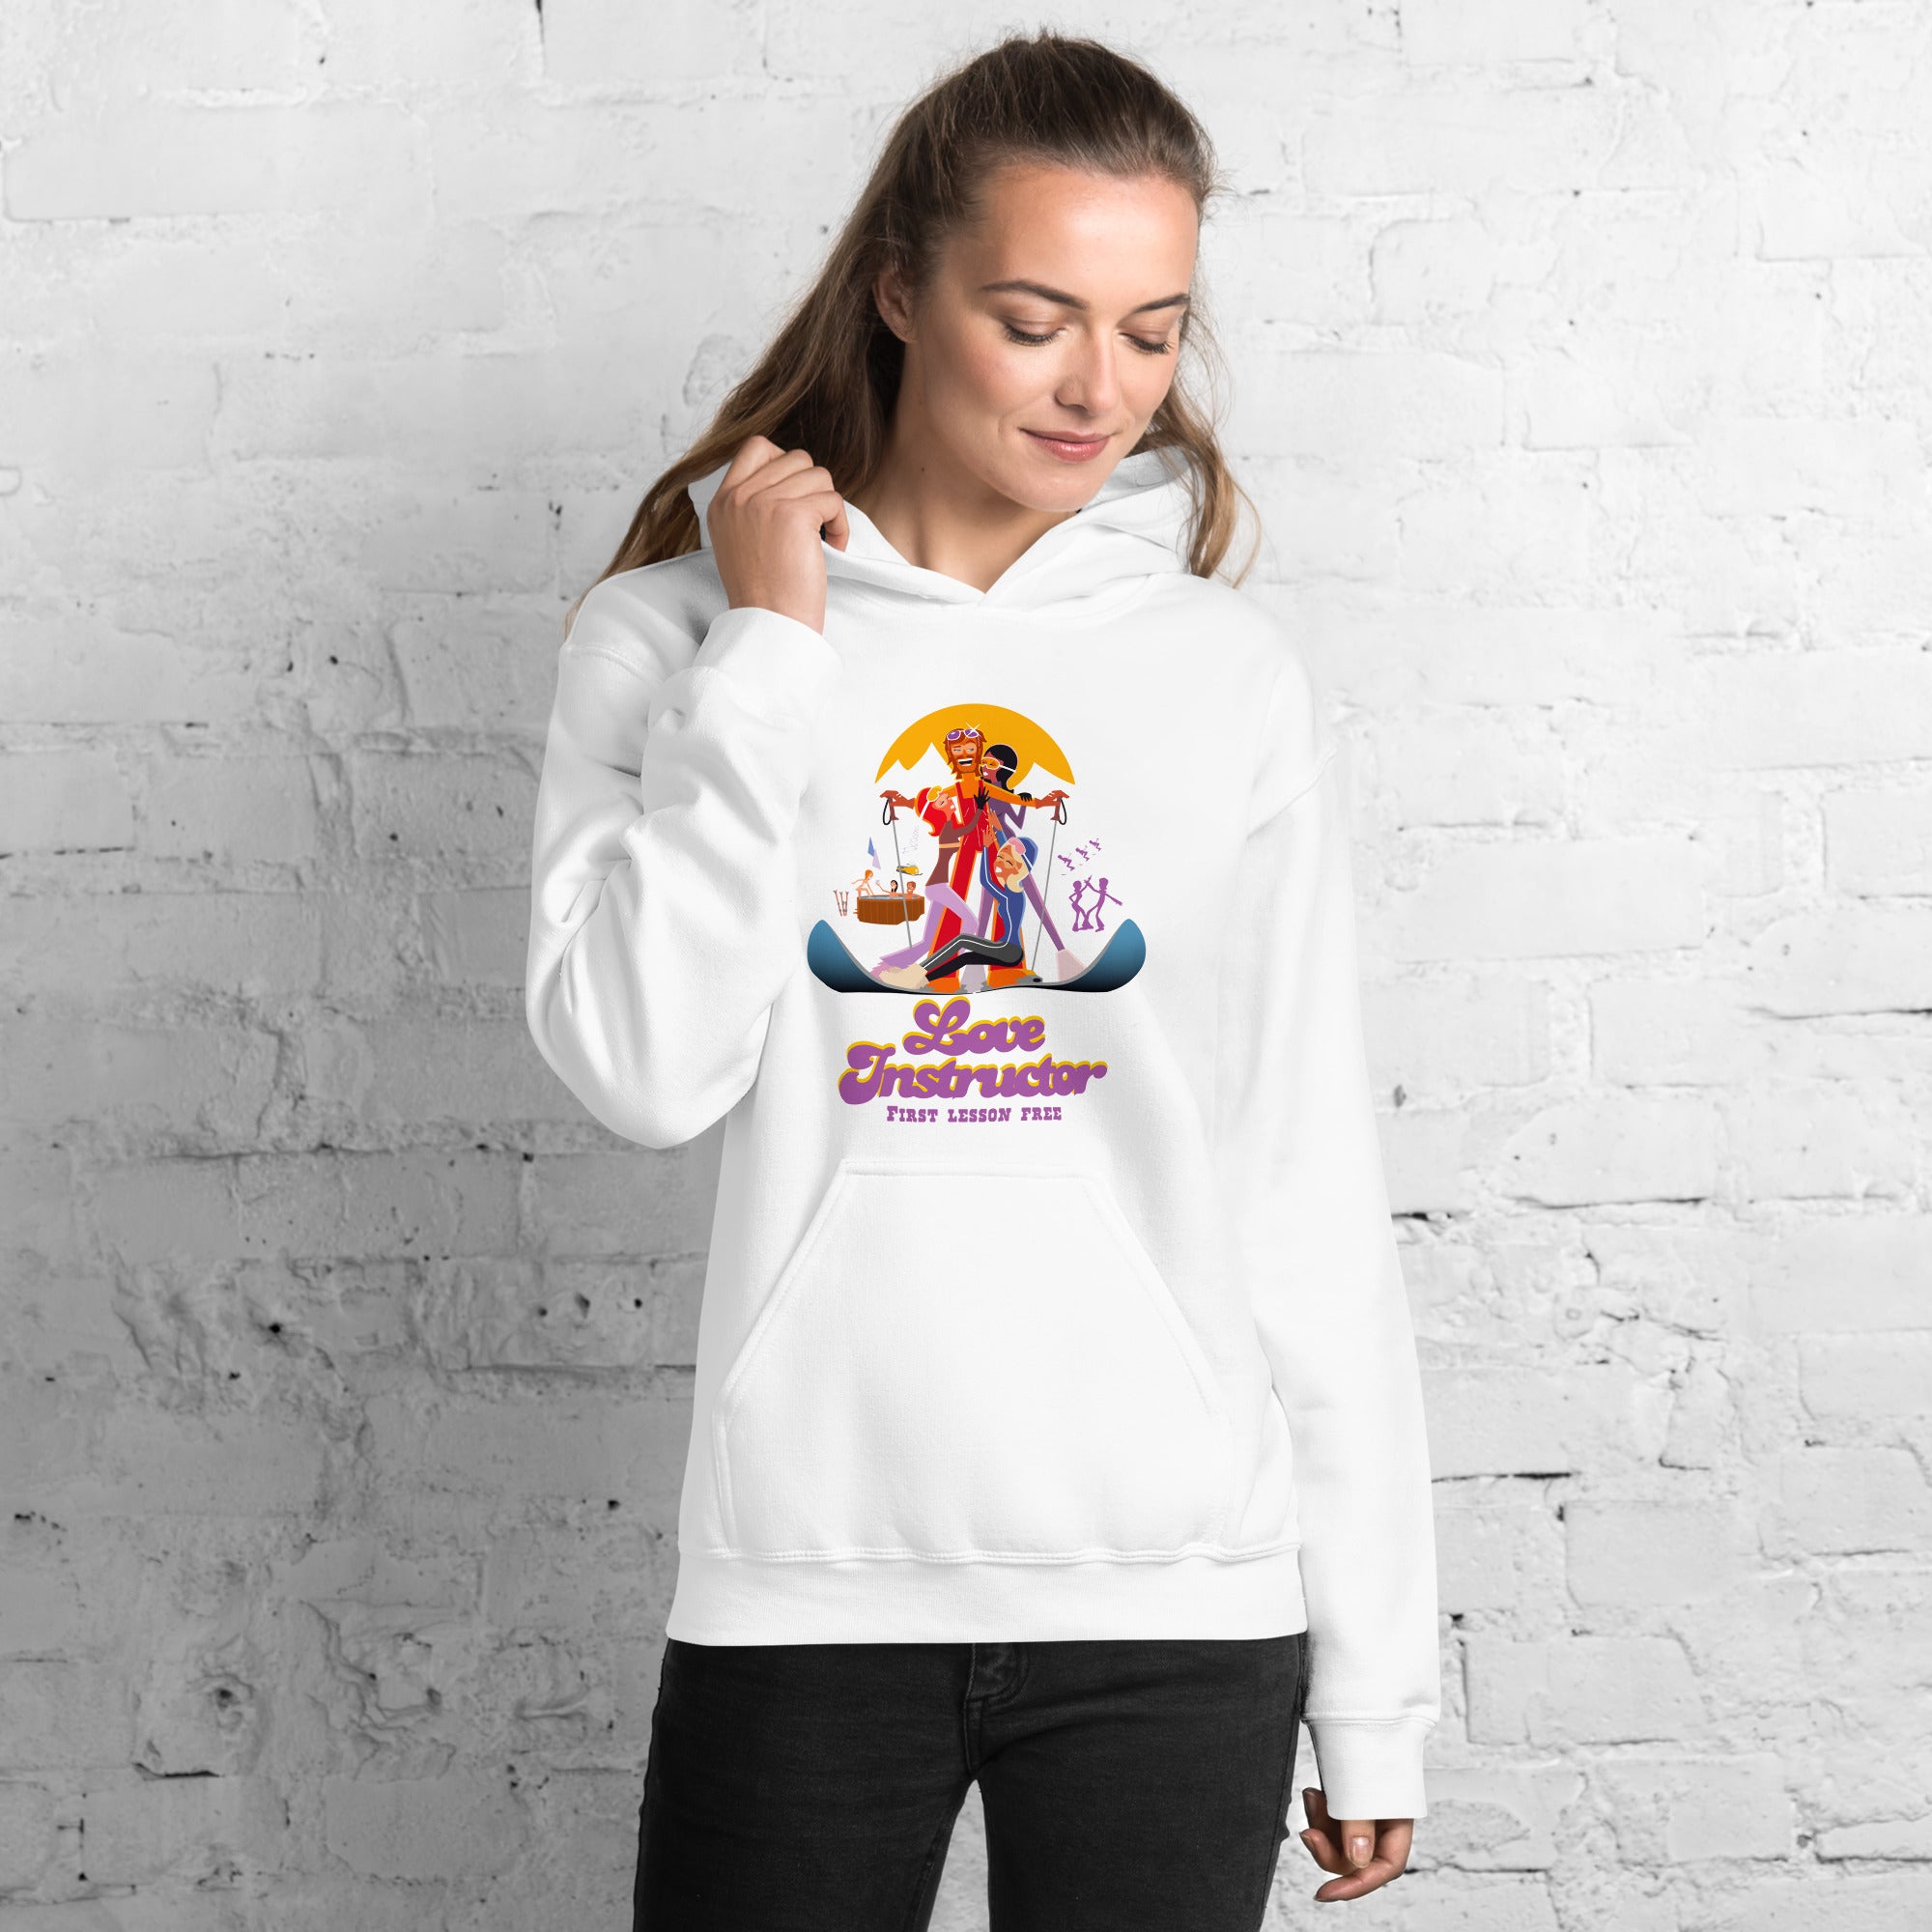 Unisex Hoodie Love Instructor First Lesson free on light colors